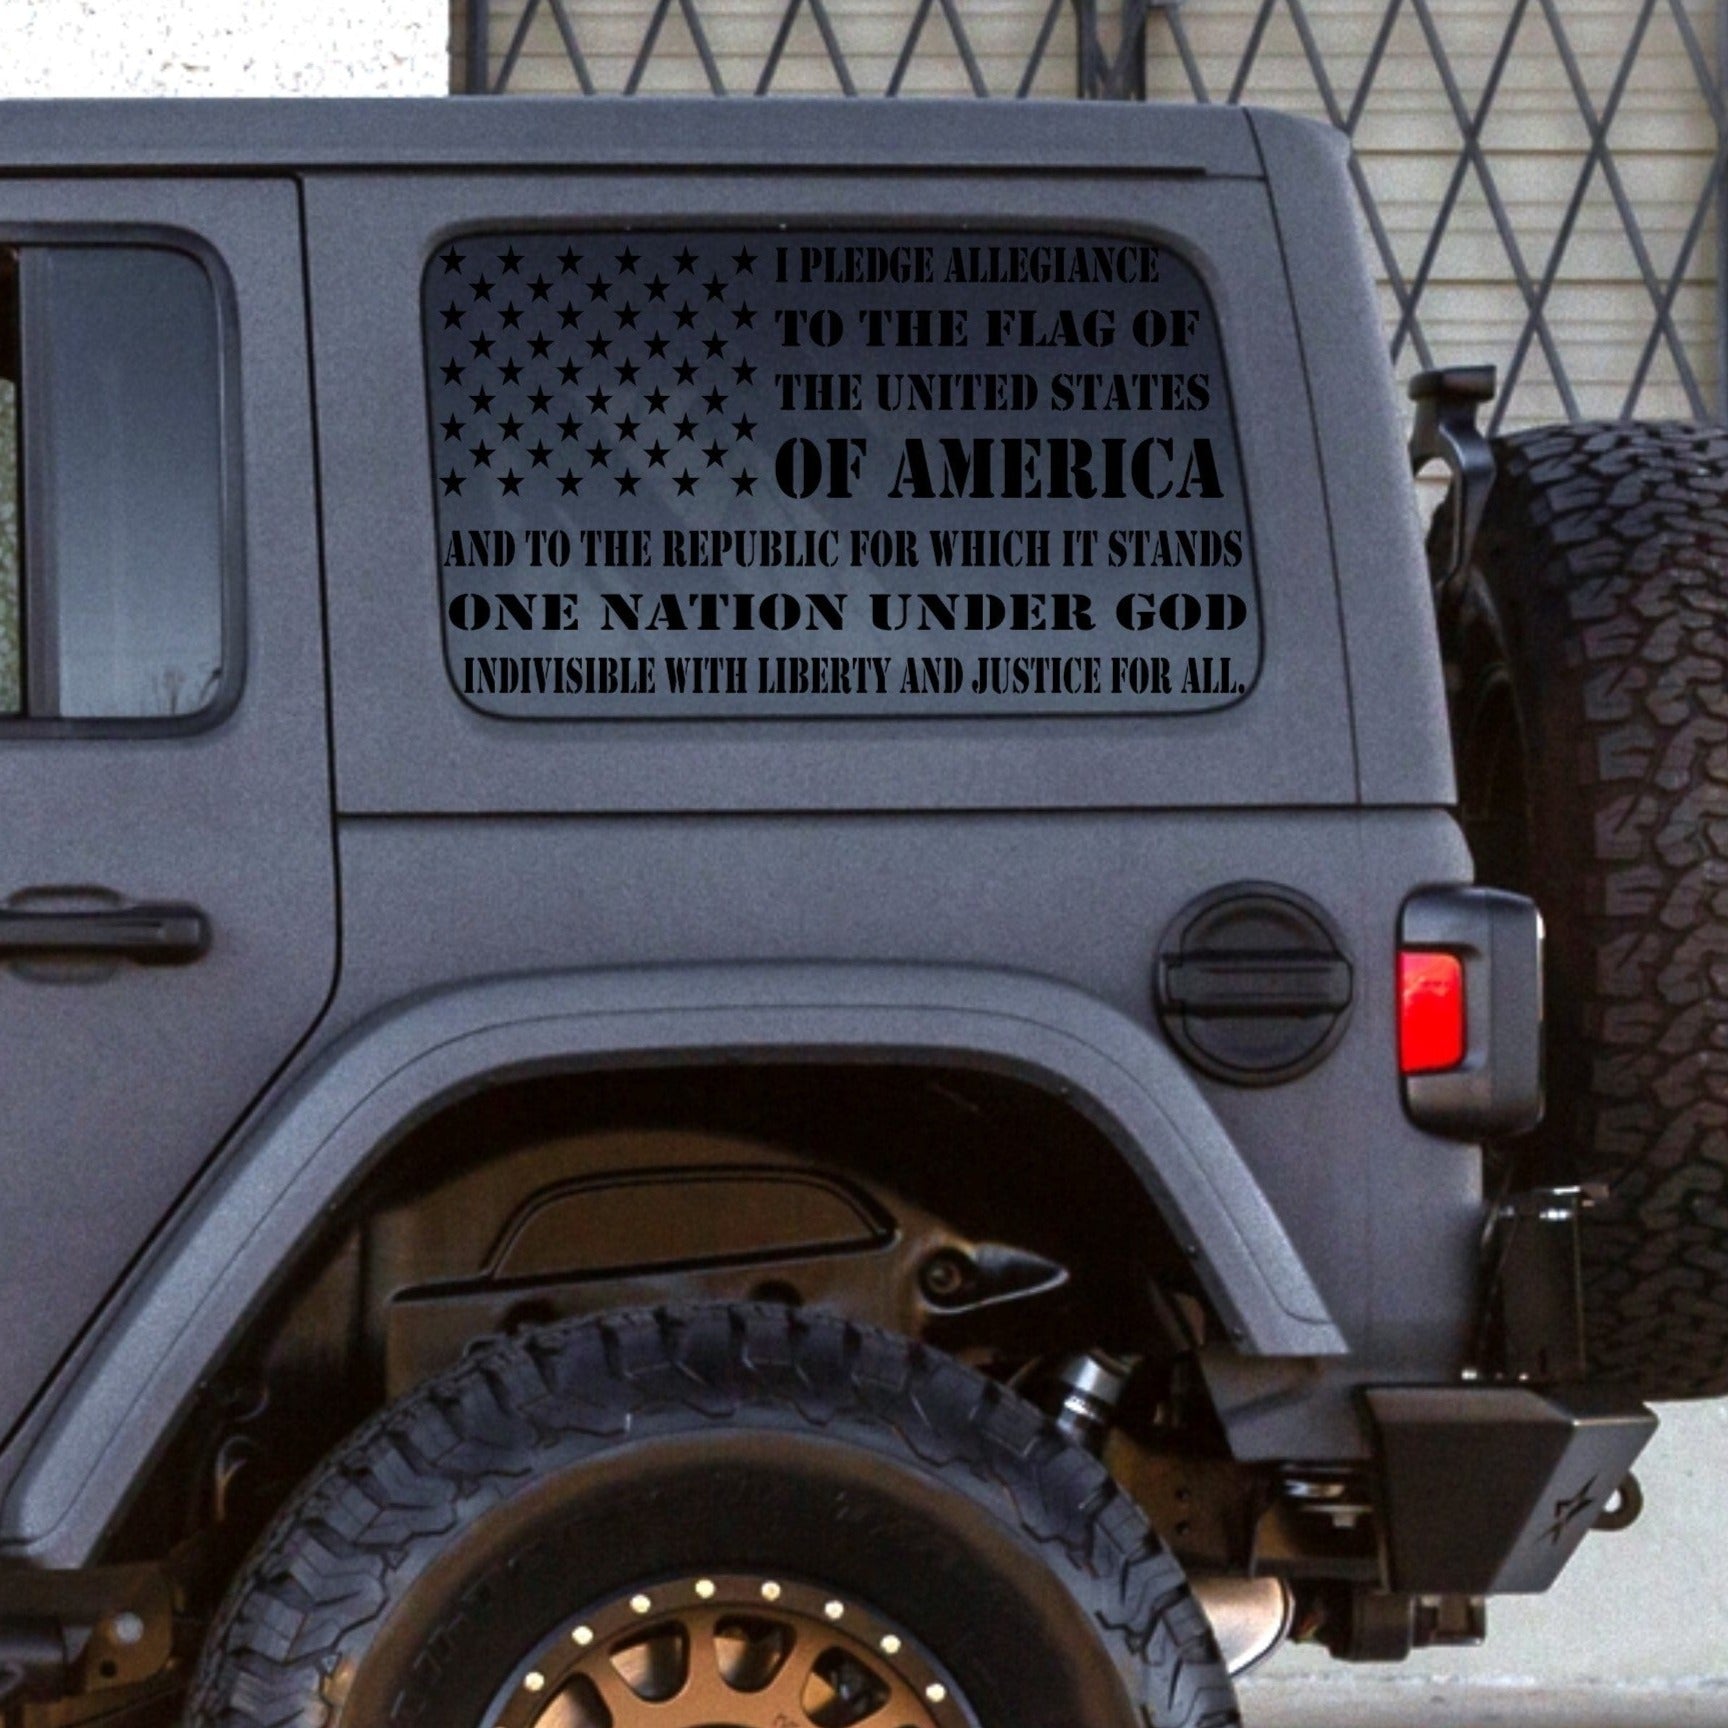 Jeep Wrangler JL JK Decals "WE THE PEOPLE" Preamble to the Constitution American Flag Stickers (2/4-Door Rear Side Windows)